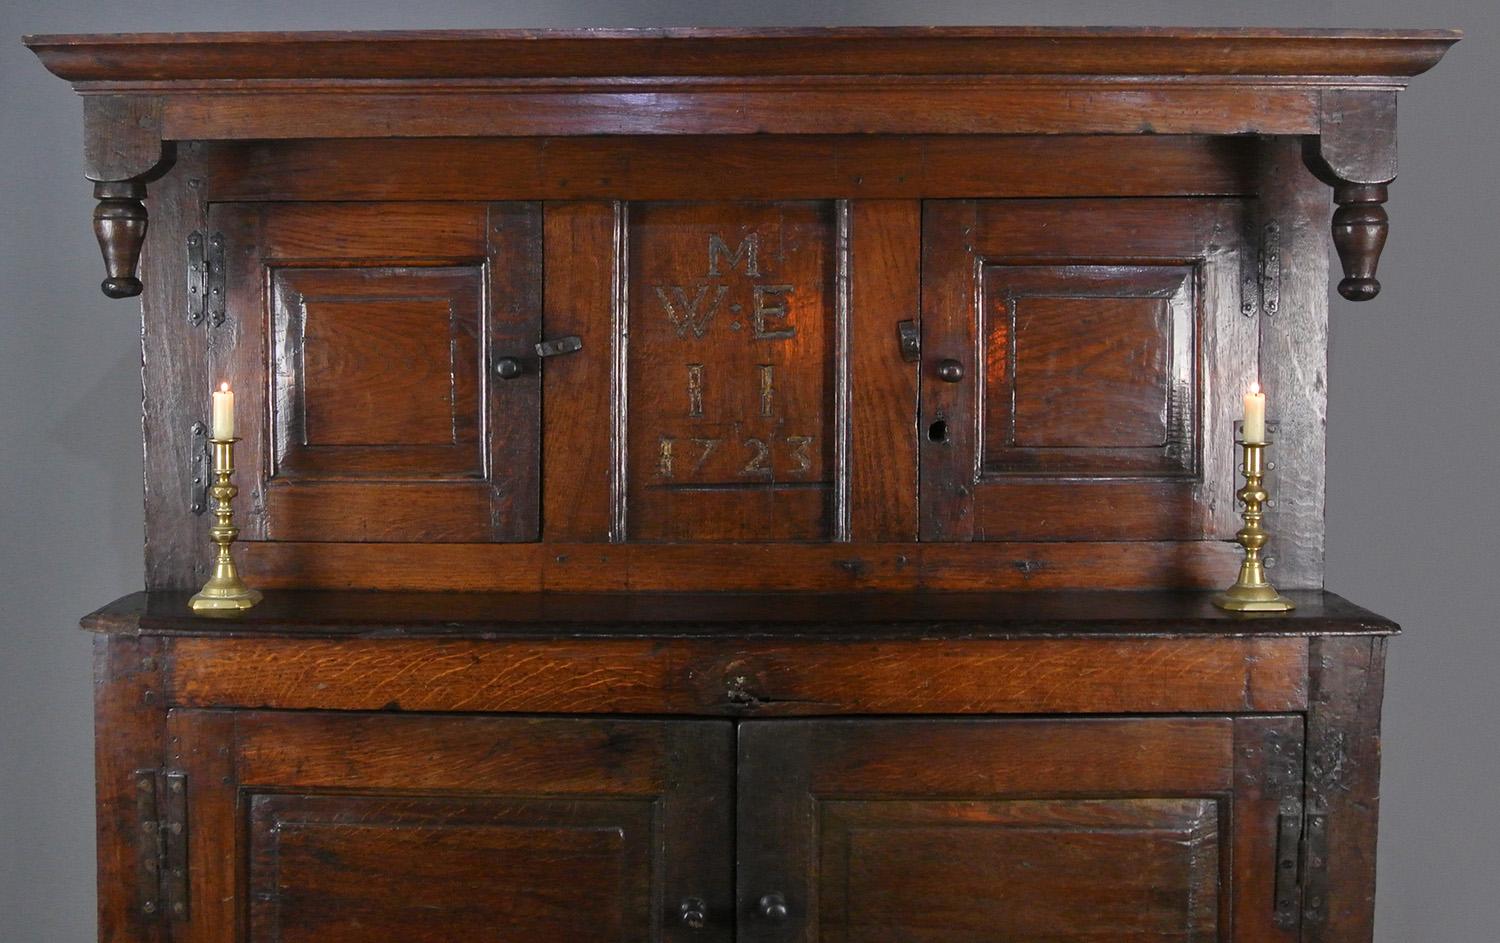 Exceptional Dated English Oak Press Cupboard with Secrets - 1723 In Good Condition For Sale In Heathfield, GB